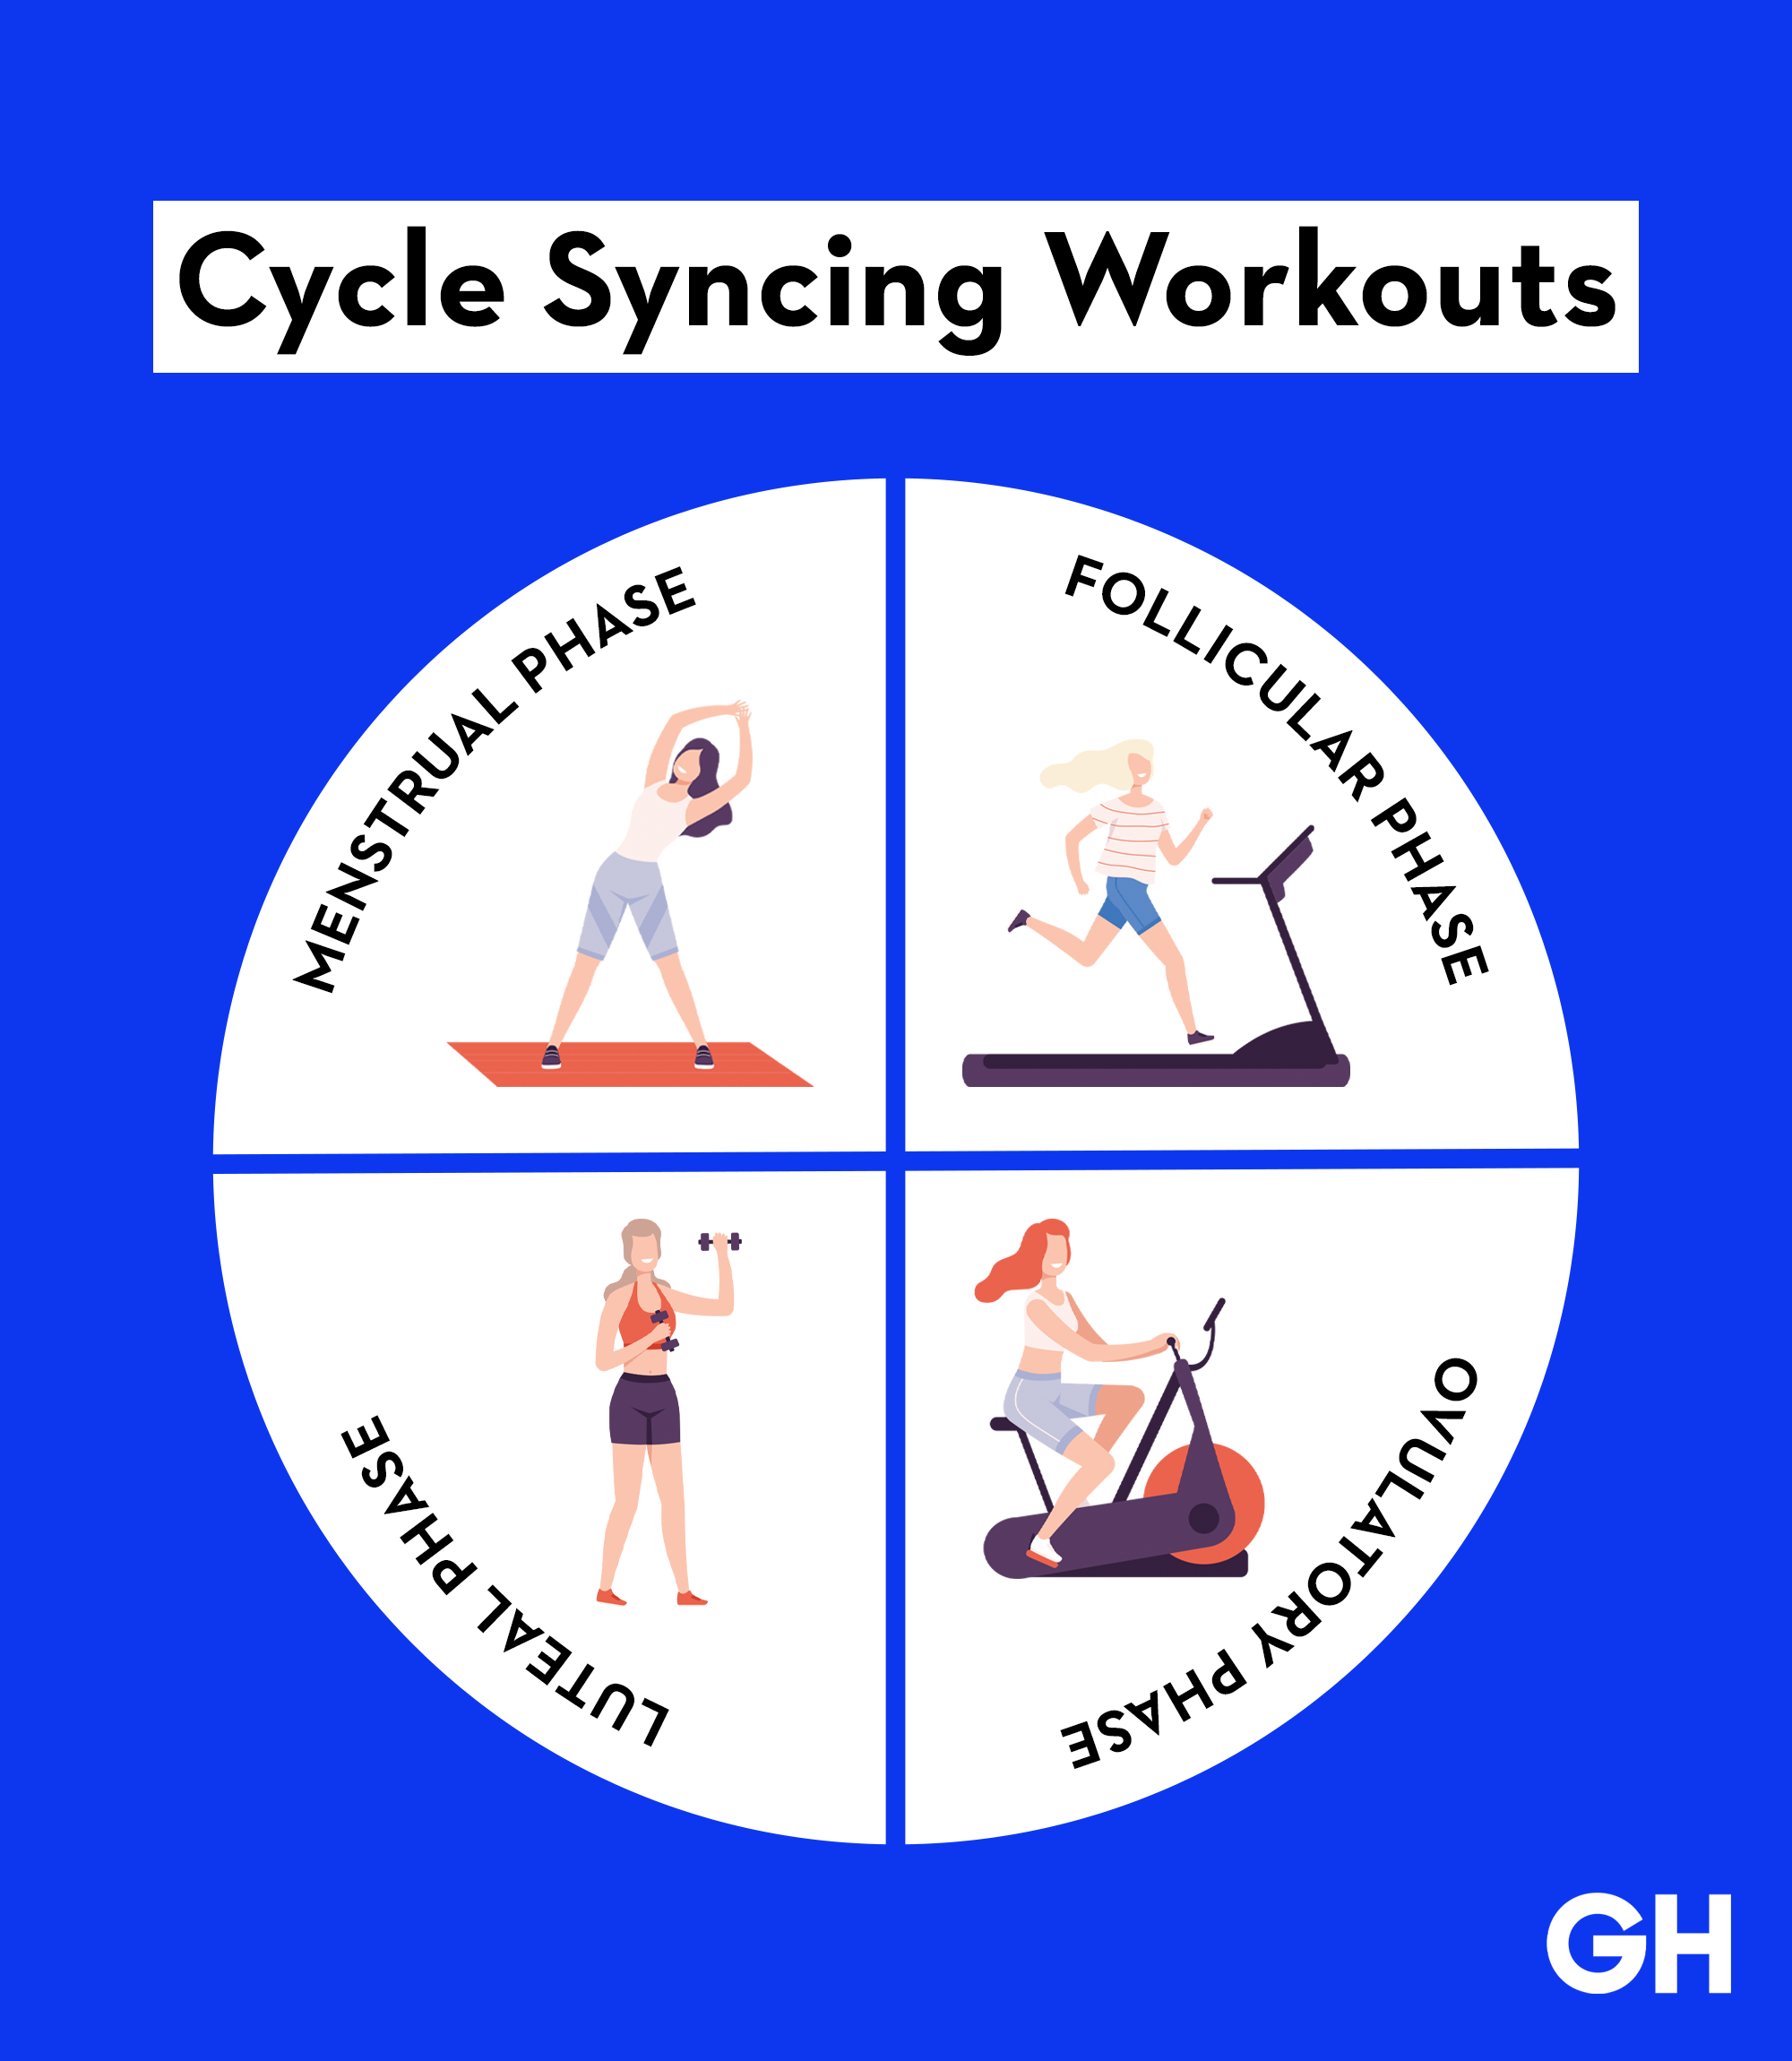 What is Cycle Syncing Really About?